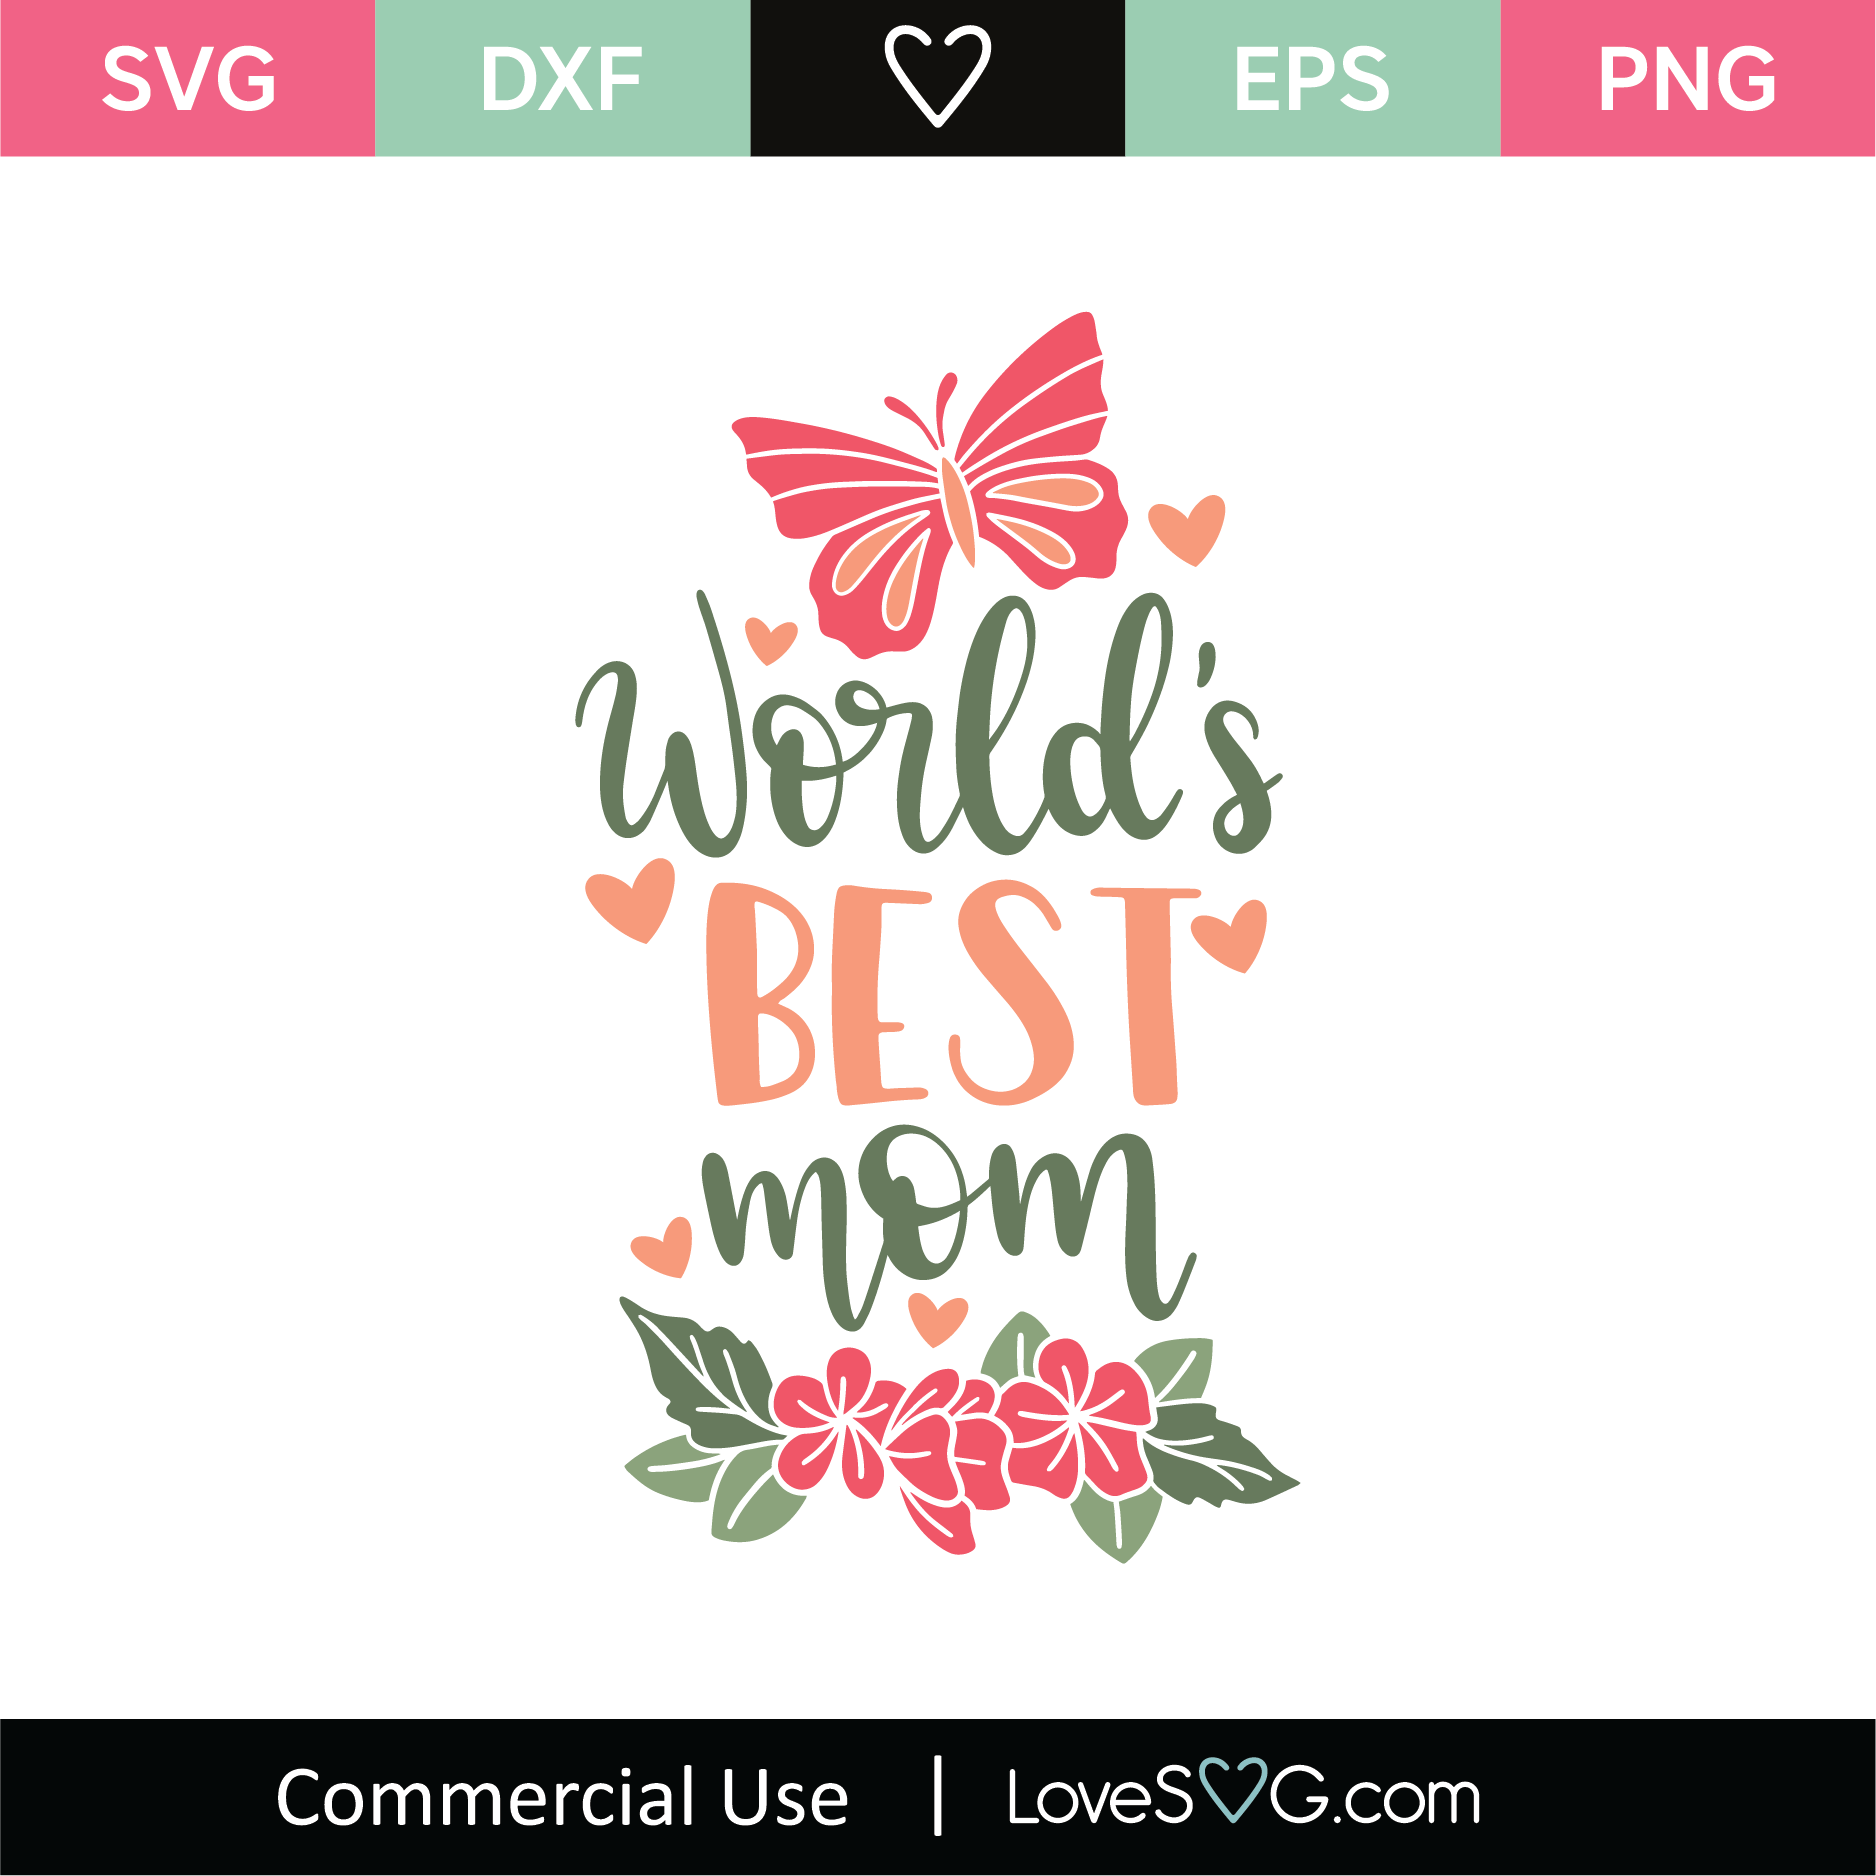 The Greatest Mom in the World SVG Cut file by Creative Fabrica Crafts